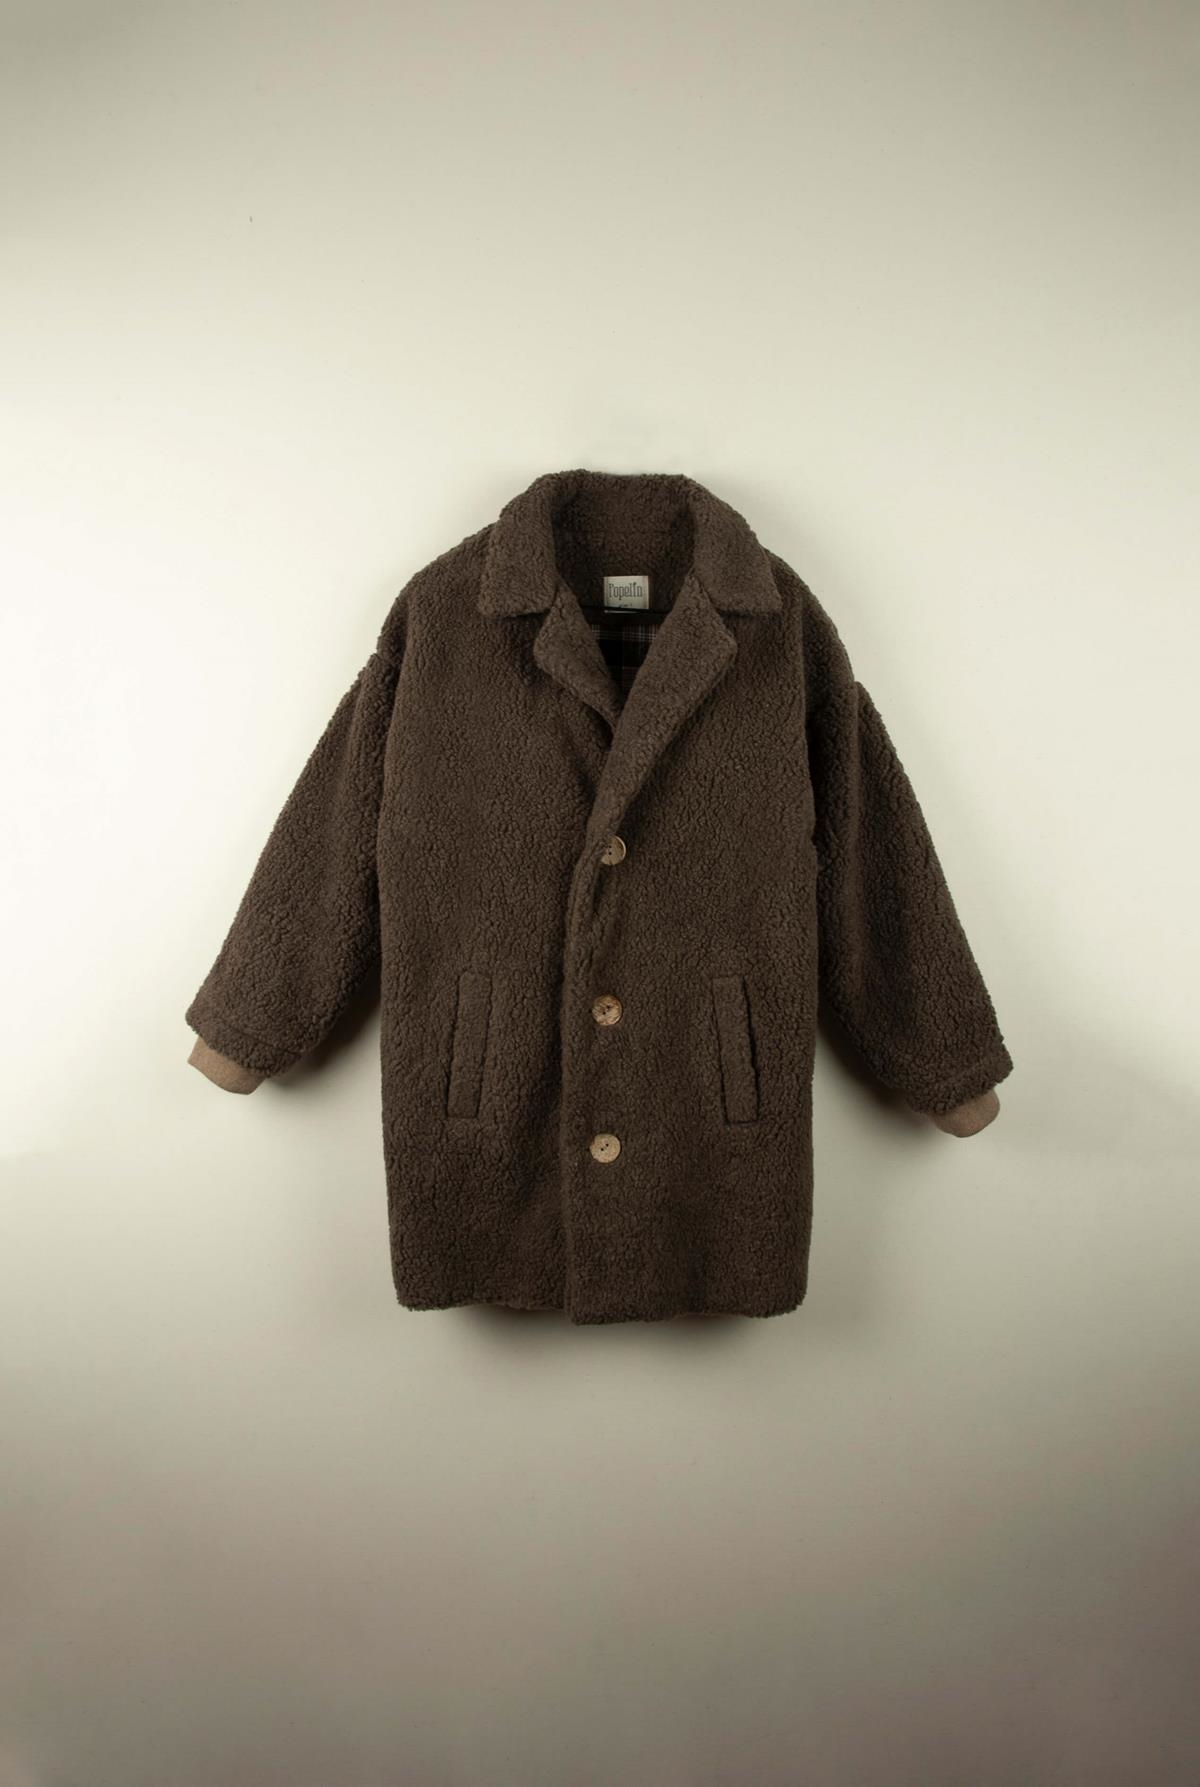 Mod.39.2 Brown coat with lapel | AW21.22 Mod.39.2 Brown coat with lapel | 1